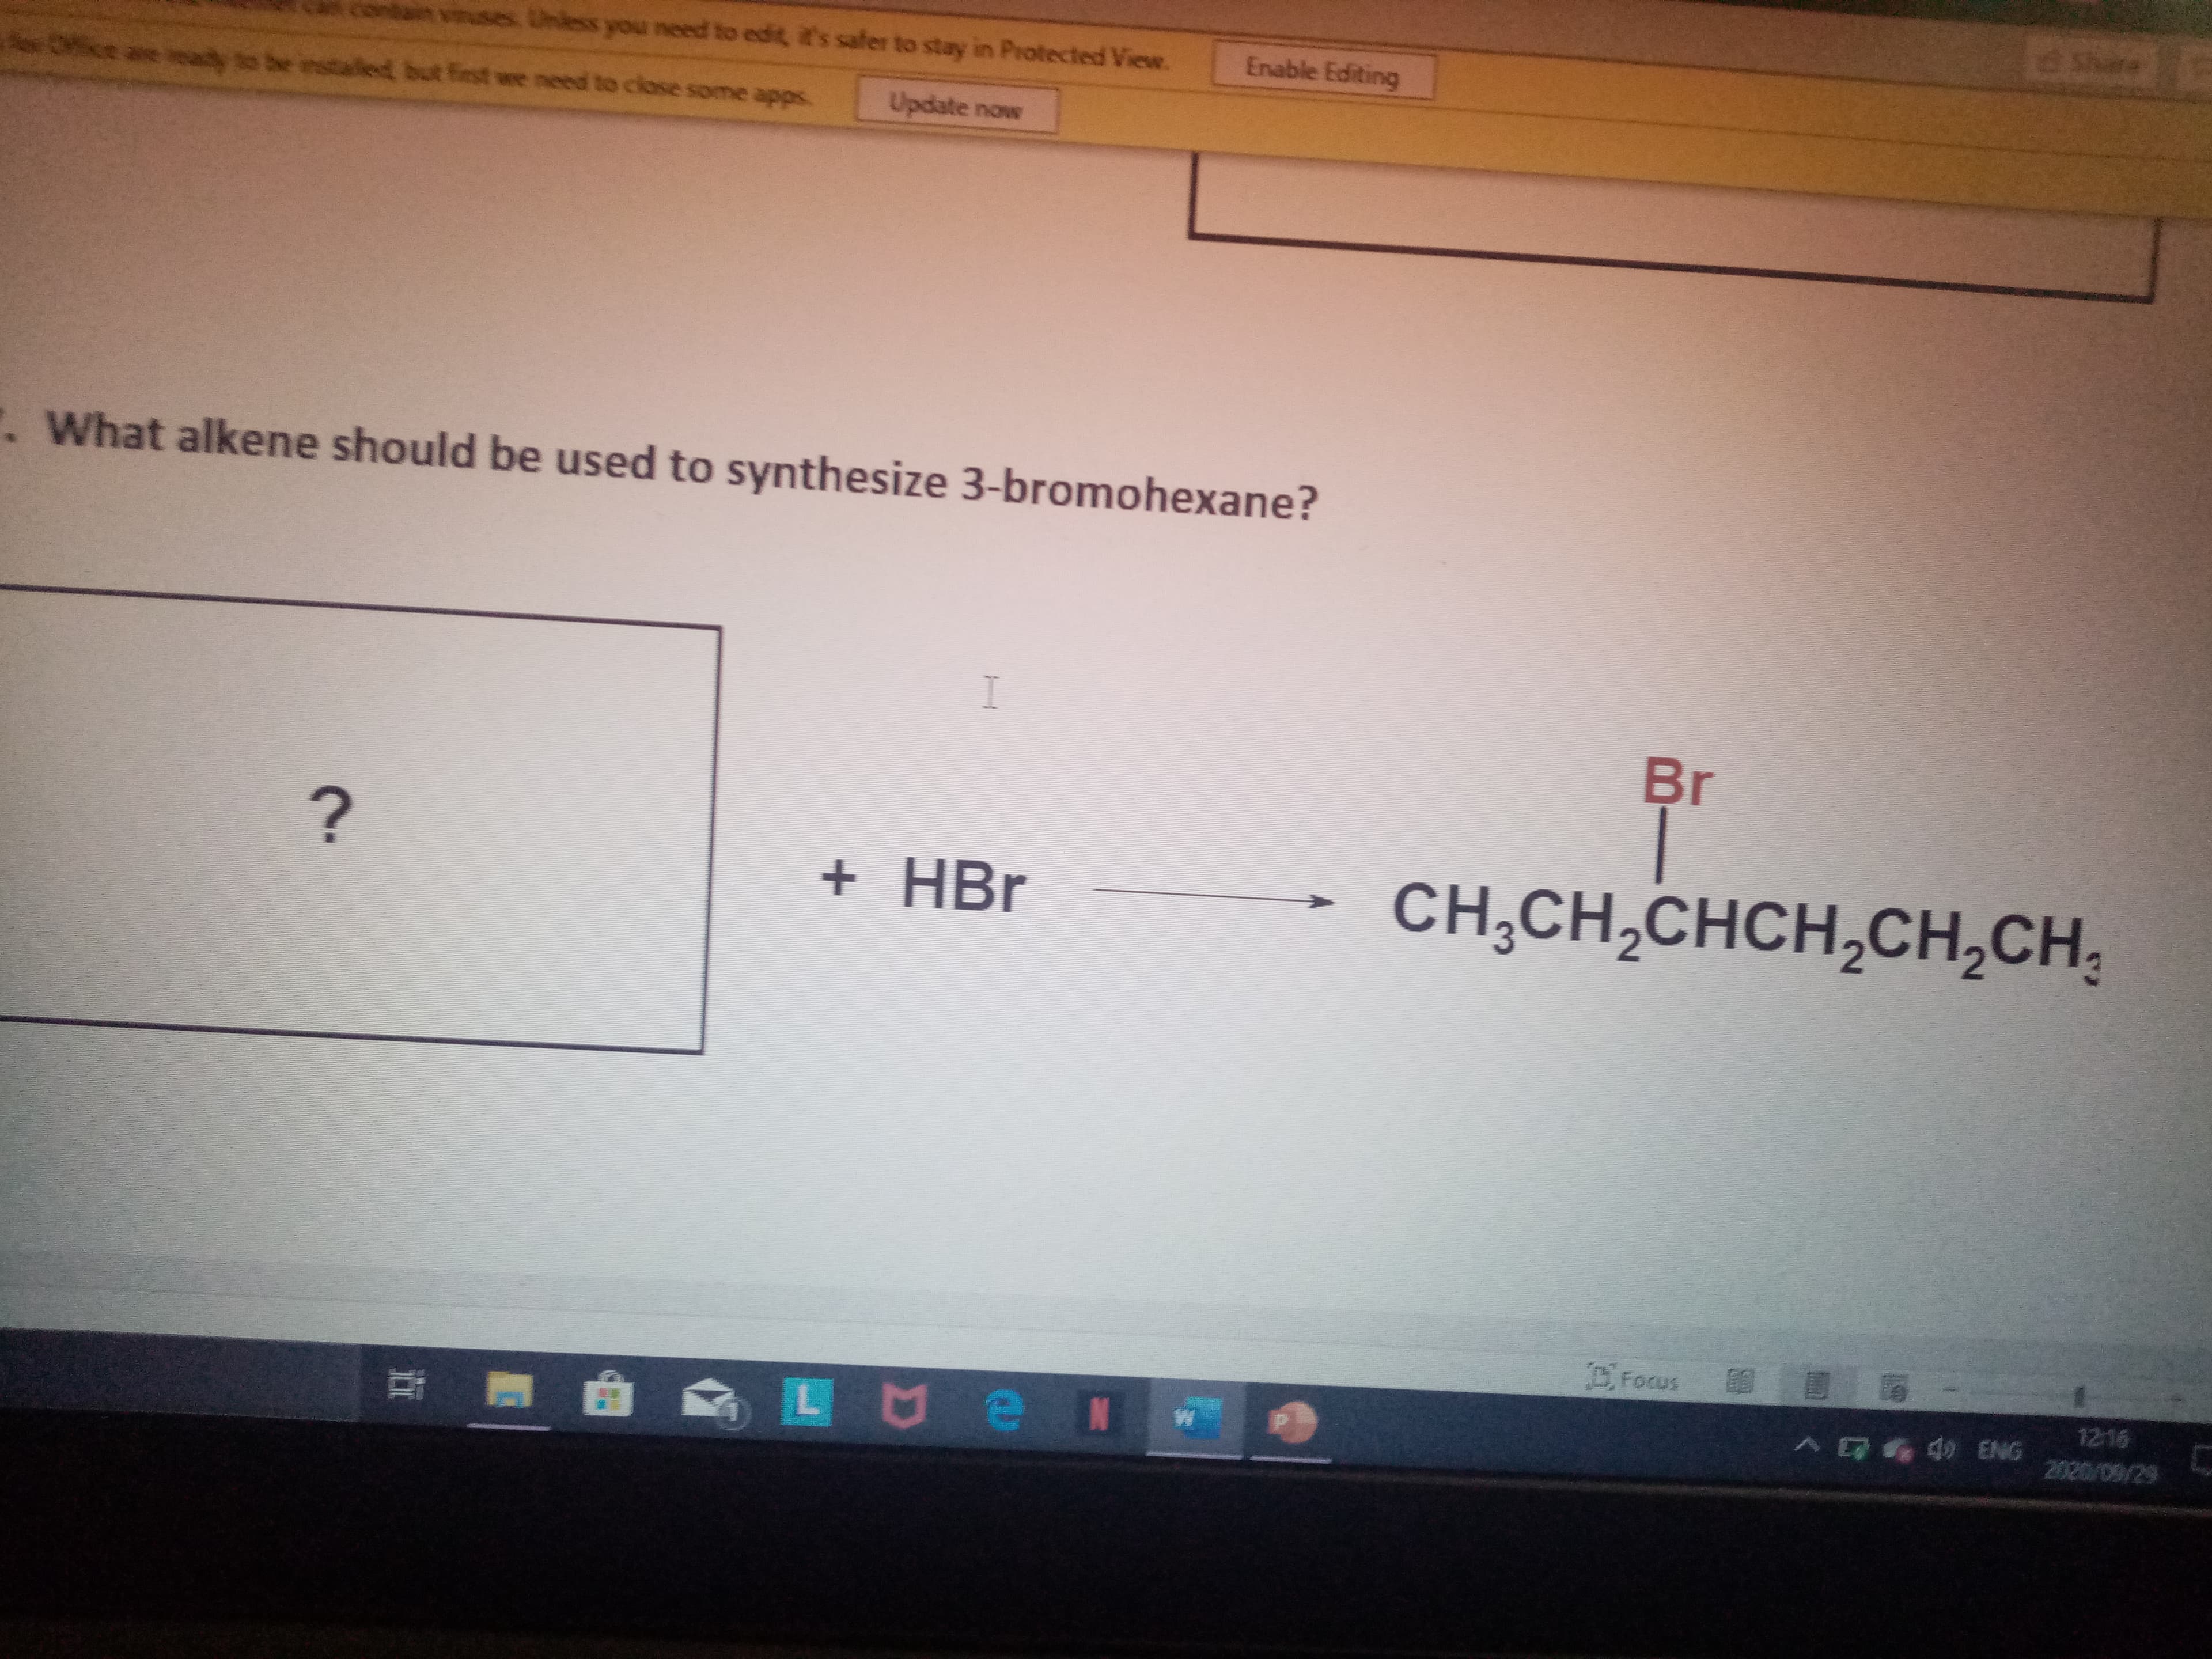 What alkene should be used to synthesize 3-bromohexane?
